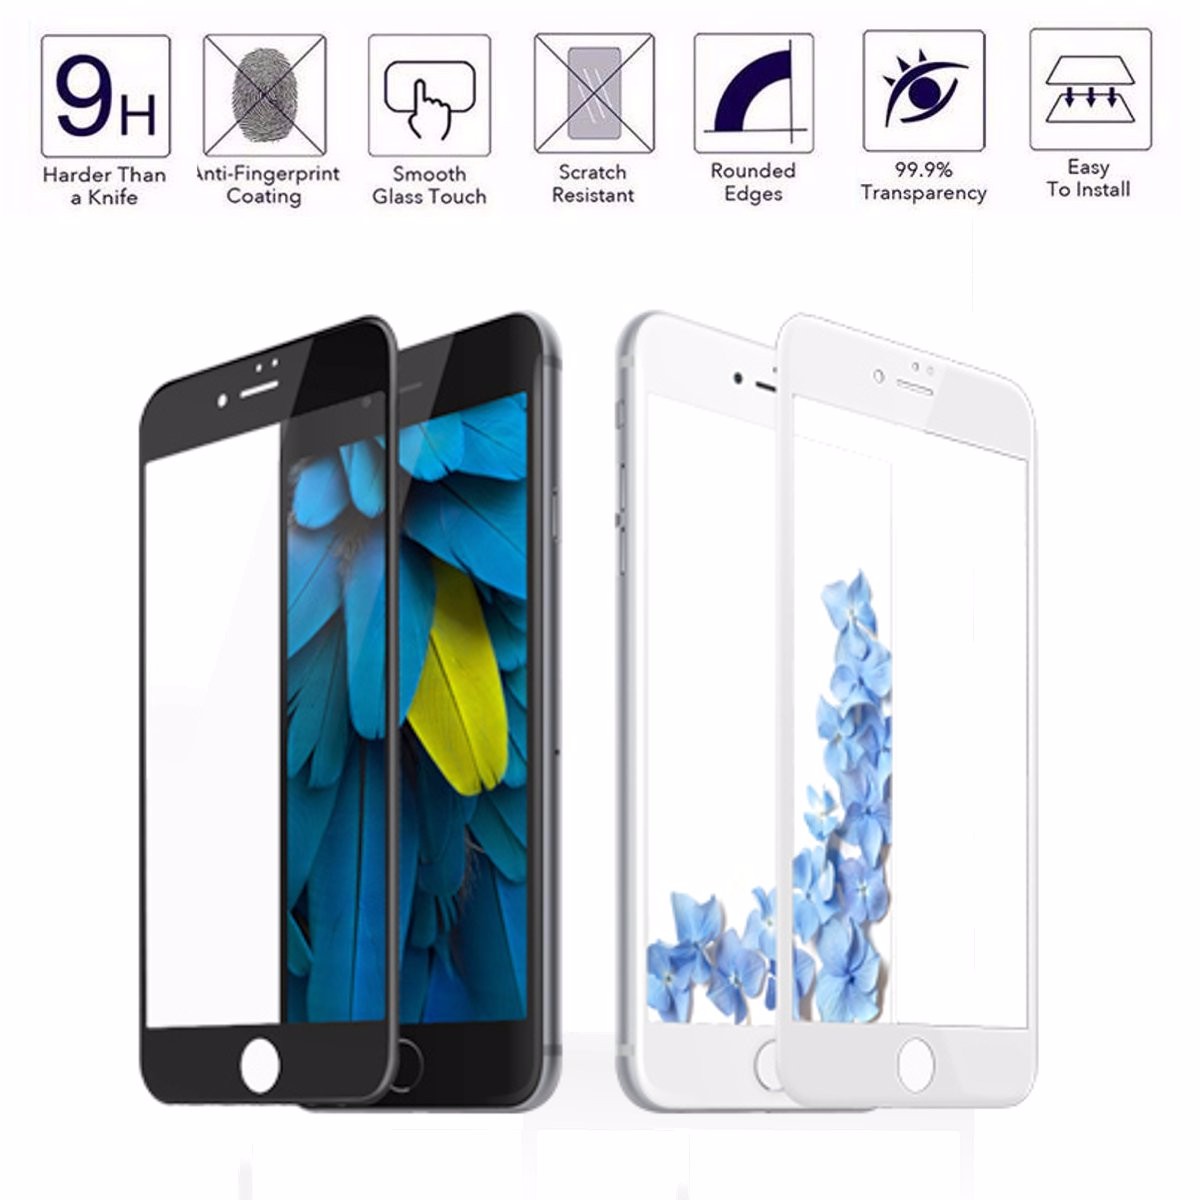 03mm-Thickness-9H-Explosion-Proof-Tempered-Glass-Screen-Protector-For-iPhone-7-Plus8-Plus-1092138